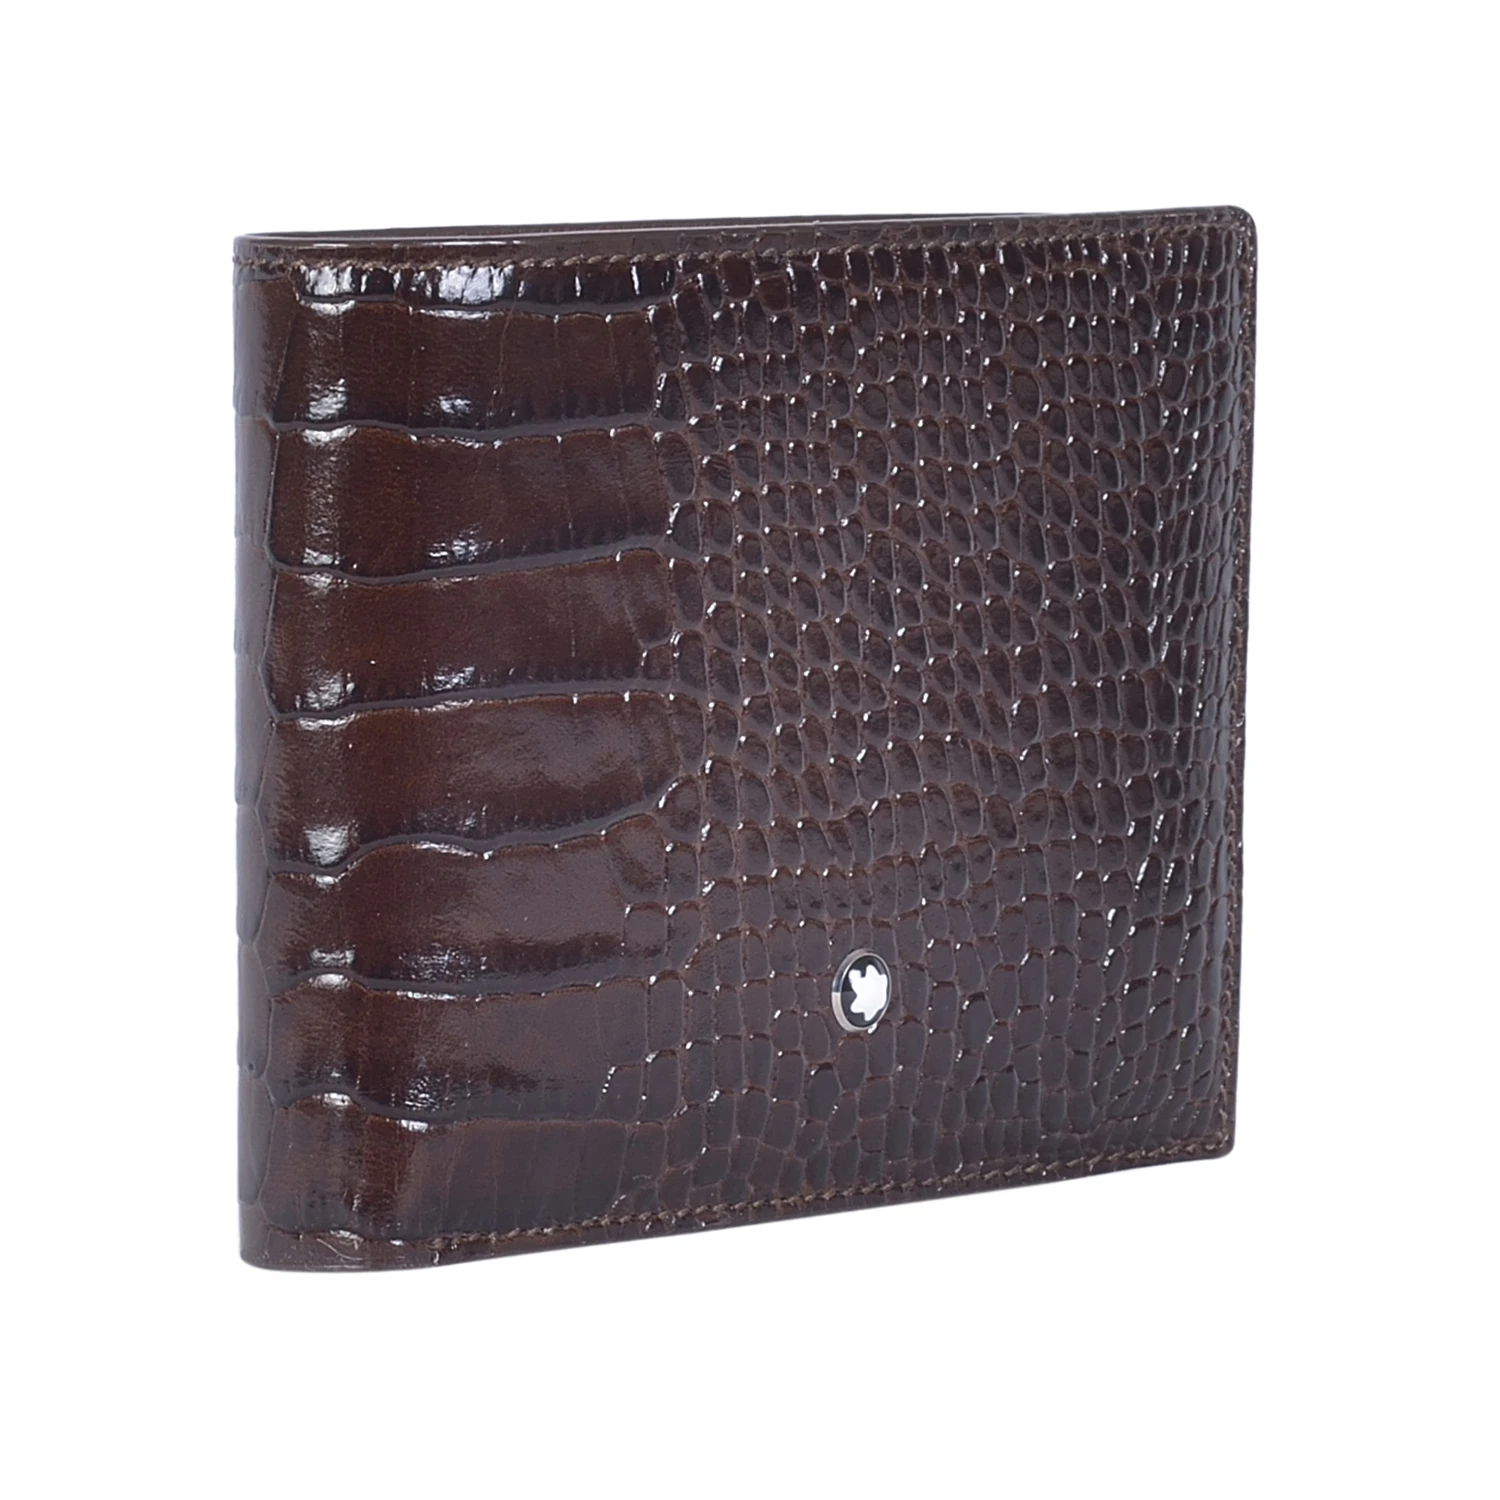 MONTBLANC MEISTERSTUCK SELECTION CAPSULE COLLECTION 6CC WALLET - Galleria di Lux Canada